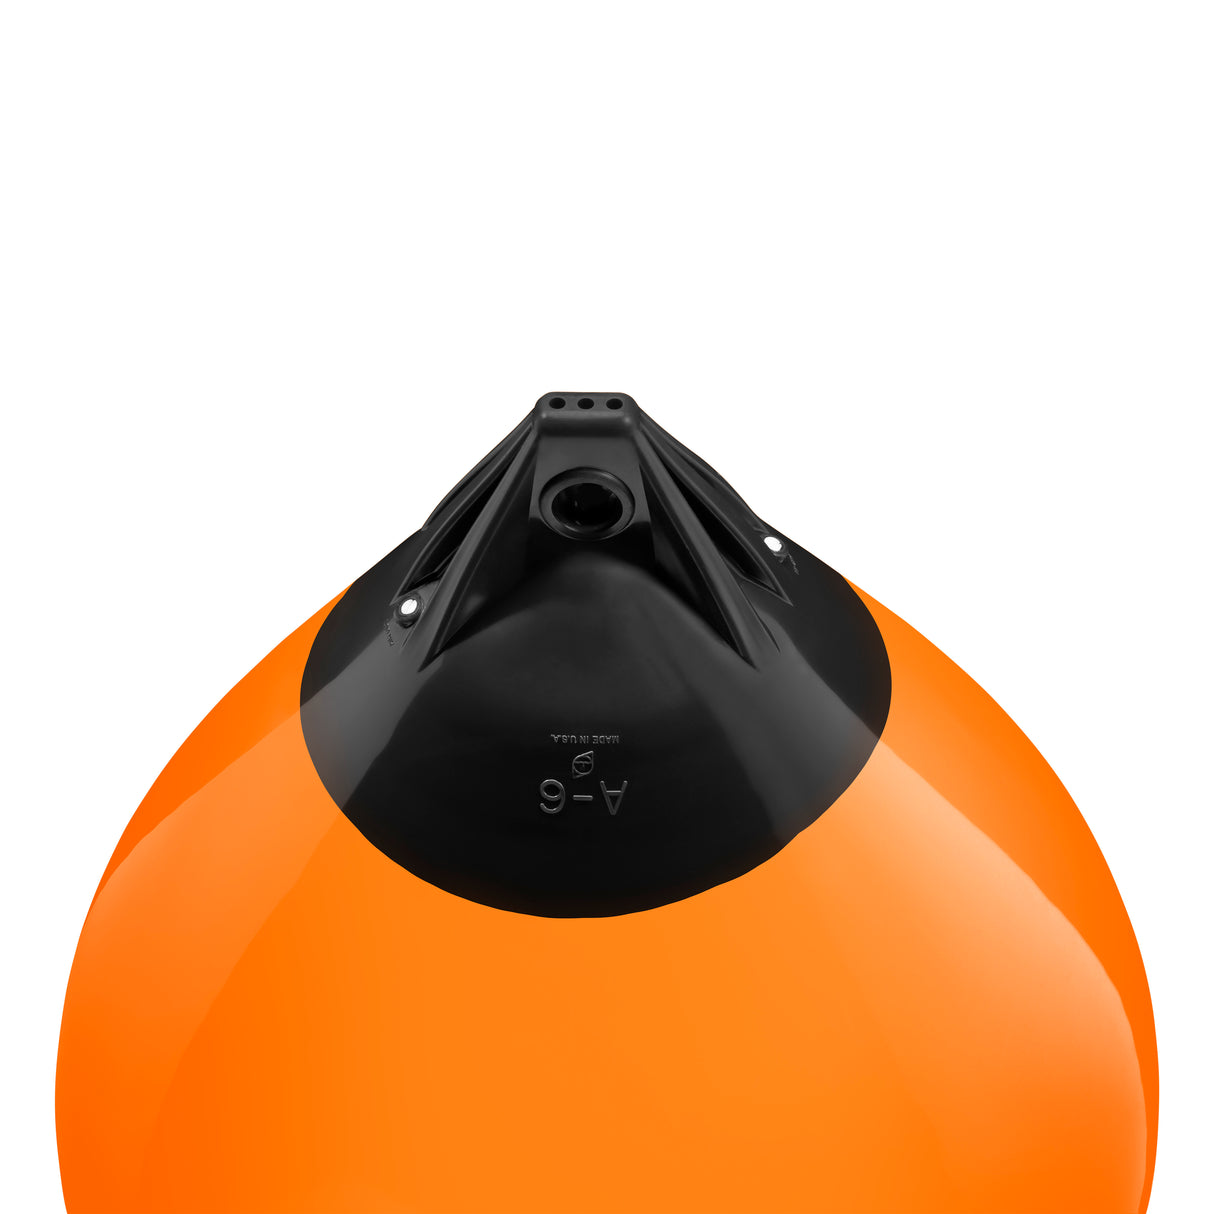 Orange buoy with Black-Top, Polyform A-6 angled shot